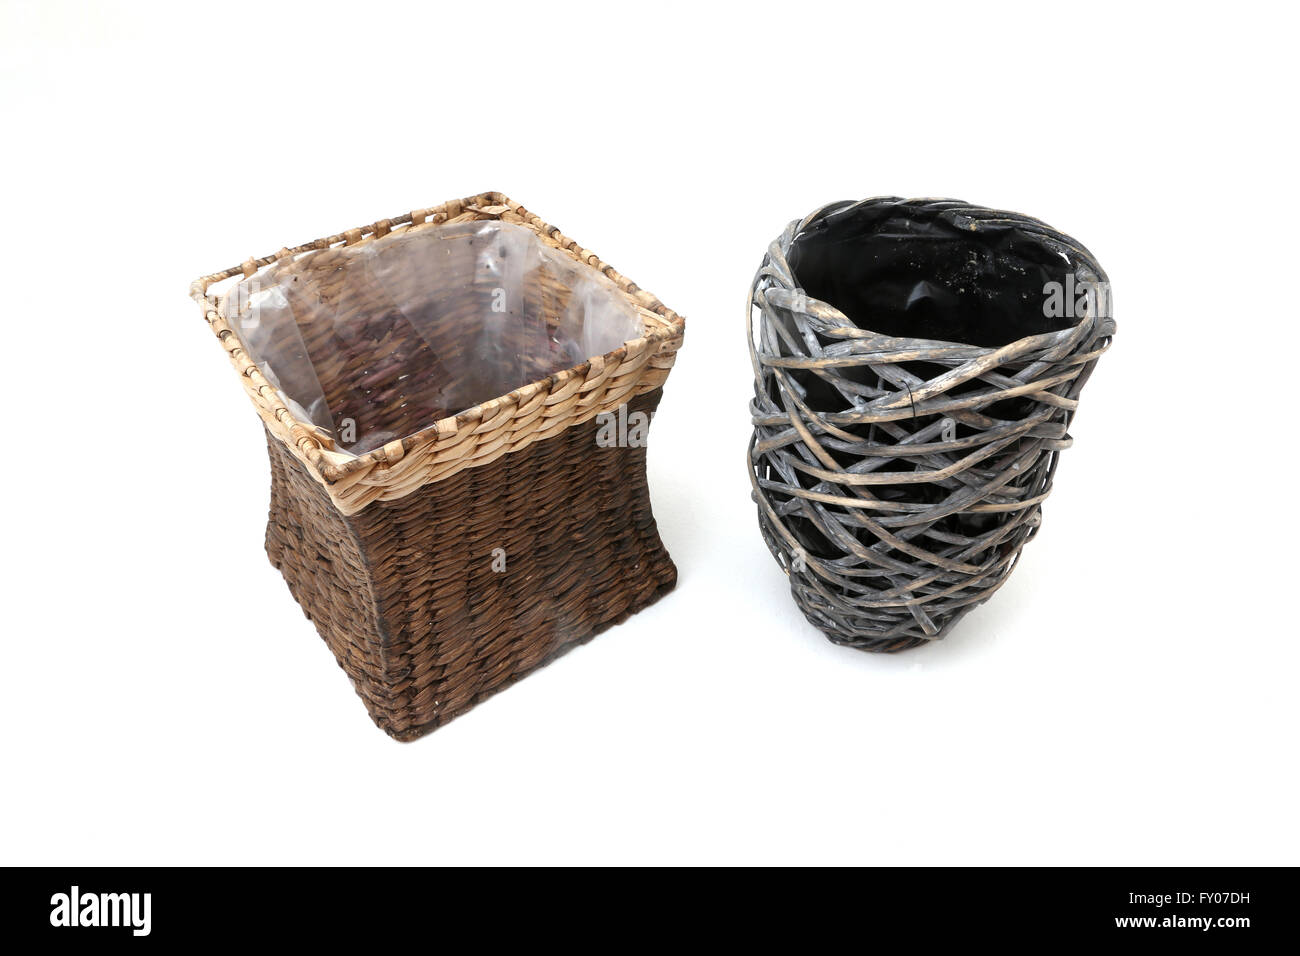 Floral Baskets Wicker And Willow Stock Photo